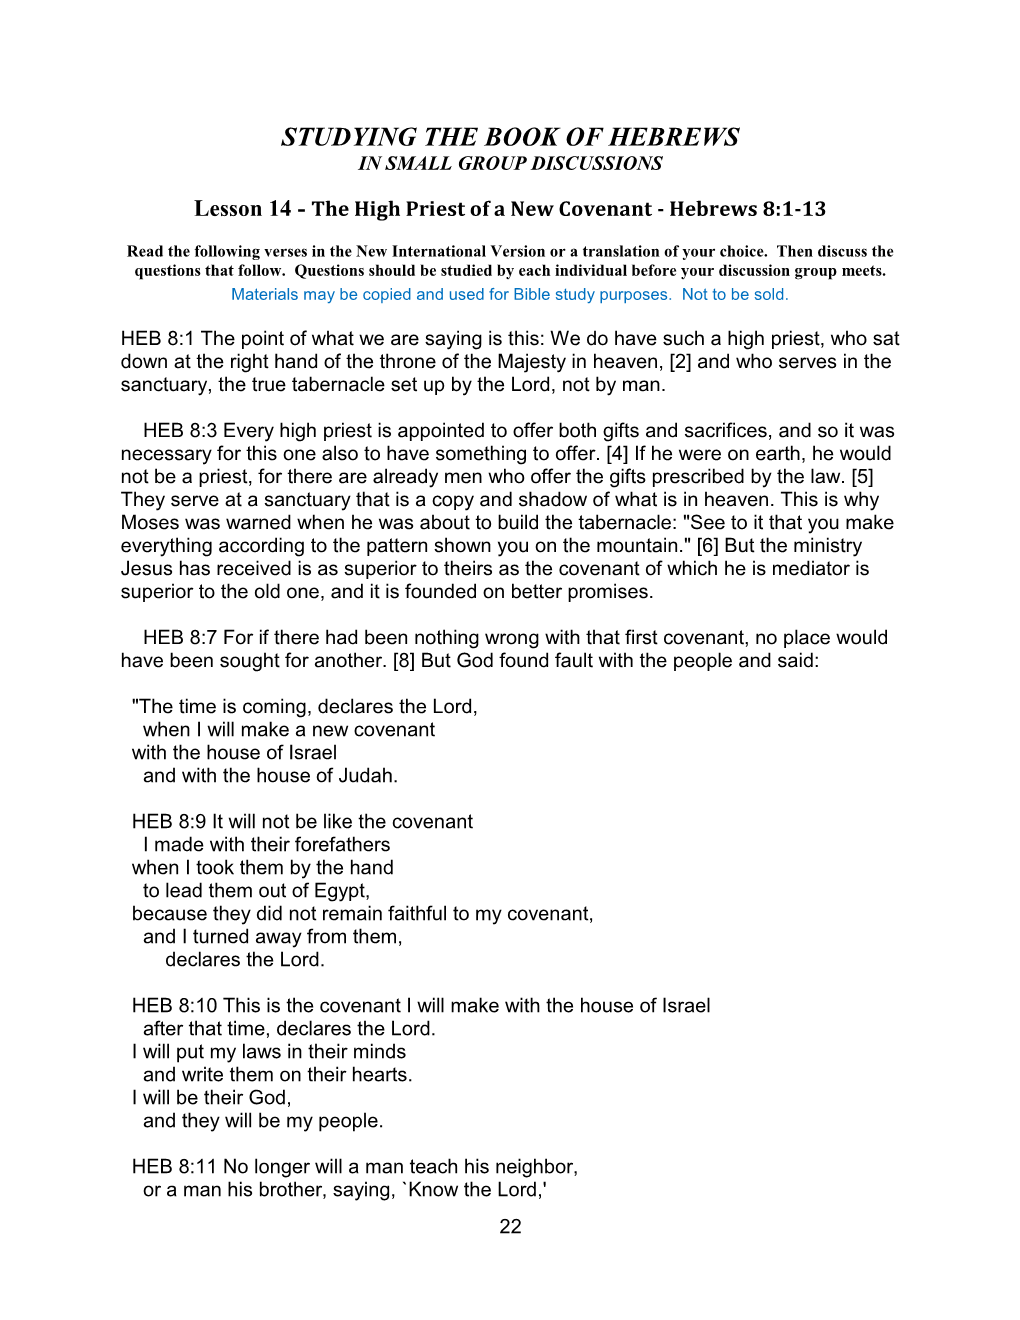 The High Priest of a New Covenant - Hebrews 8:1-13